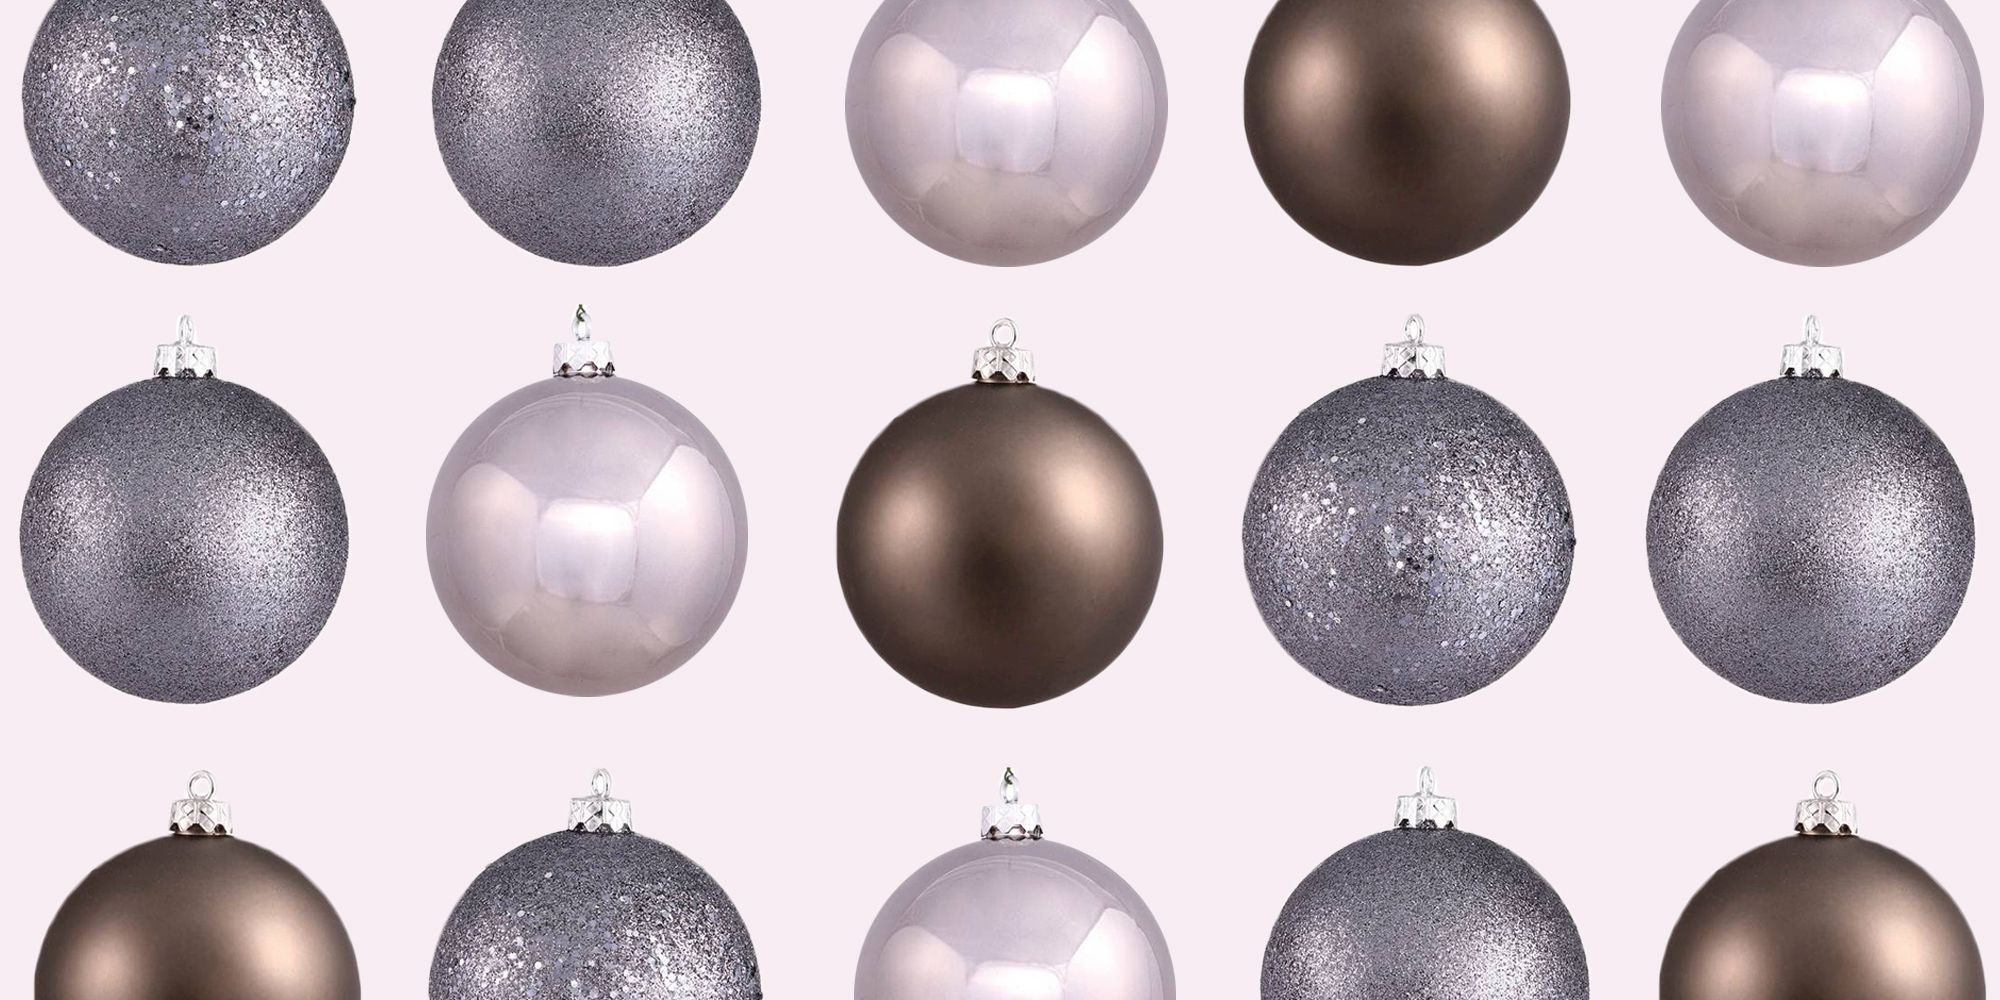 10 Best Christmas Balls for Your Tree in 2018 - Decorative Christmas ...